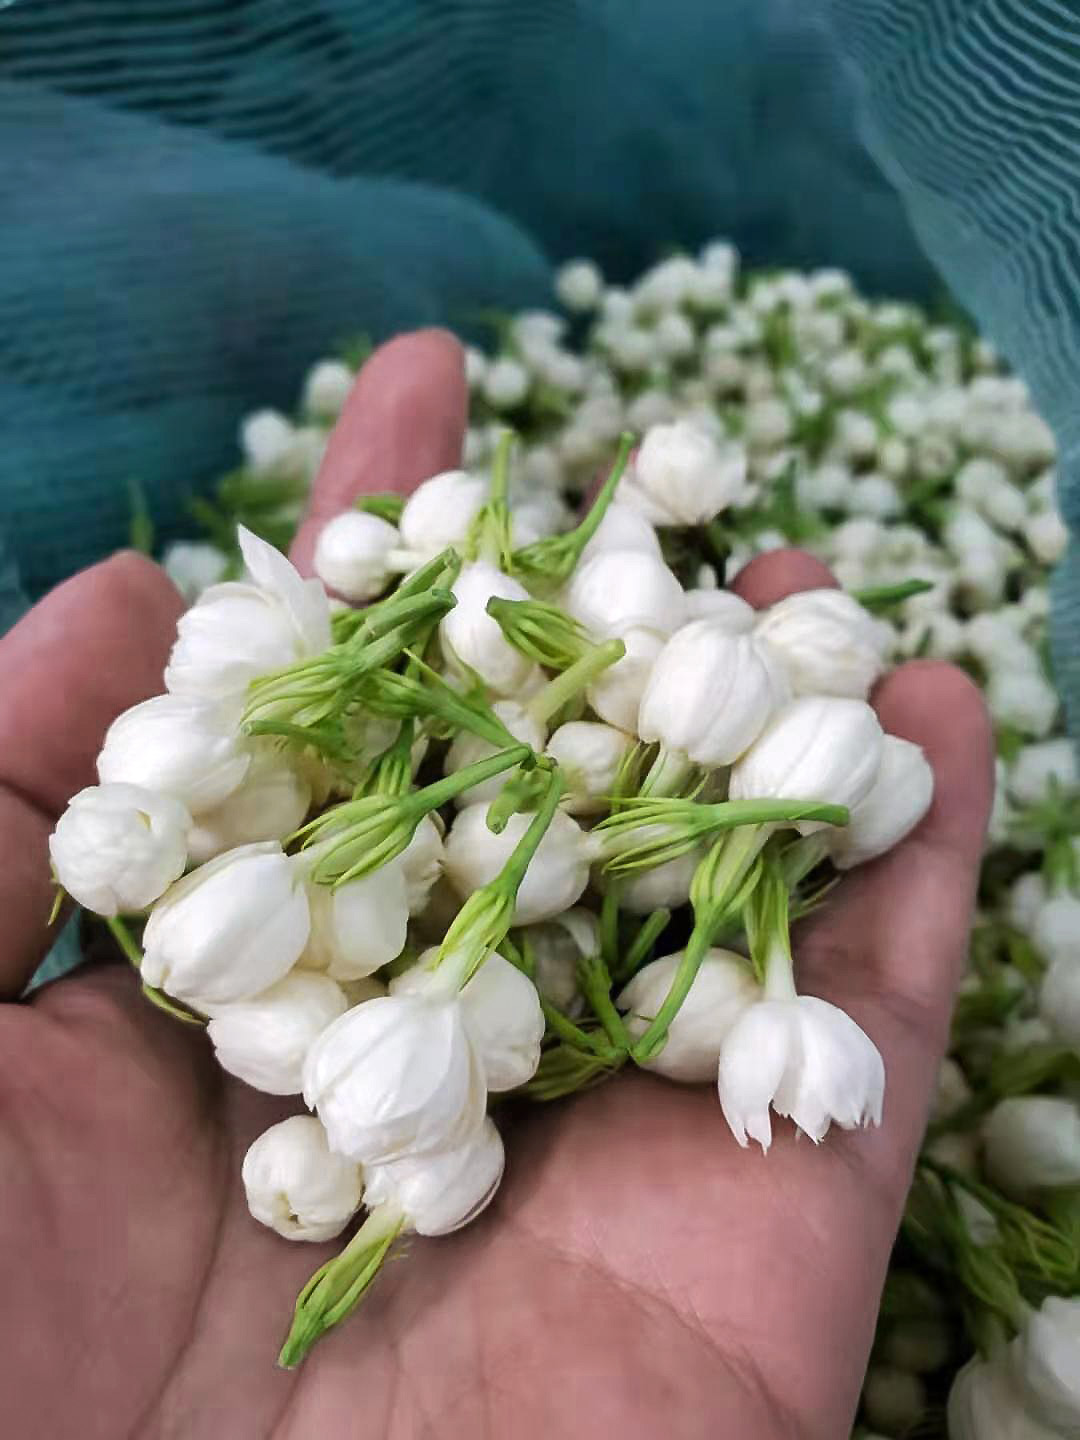 A close shot of fresh white jasmine flowers held in someones palm. Used for scenting jasmine green tea. 2021.